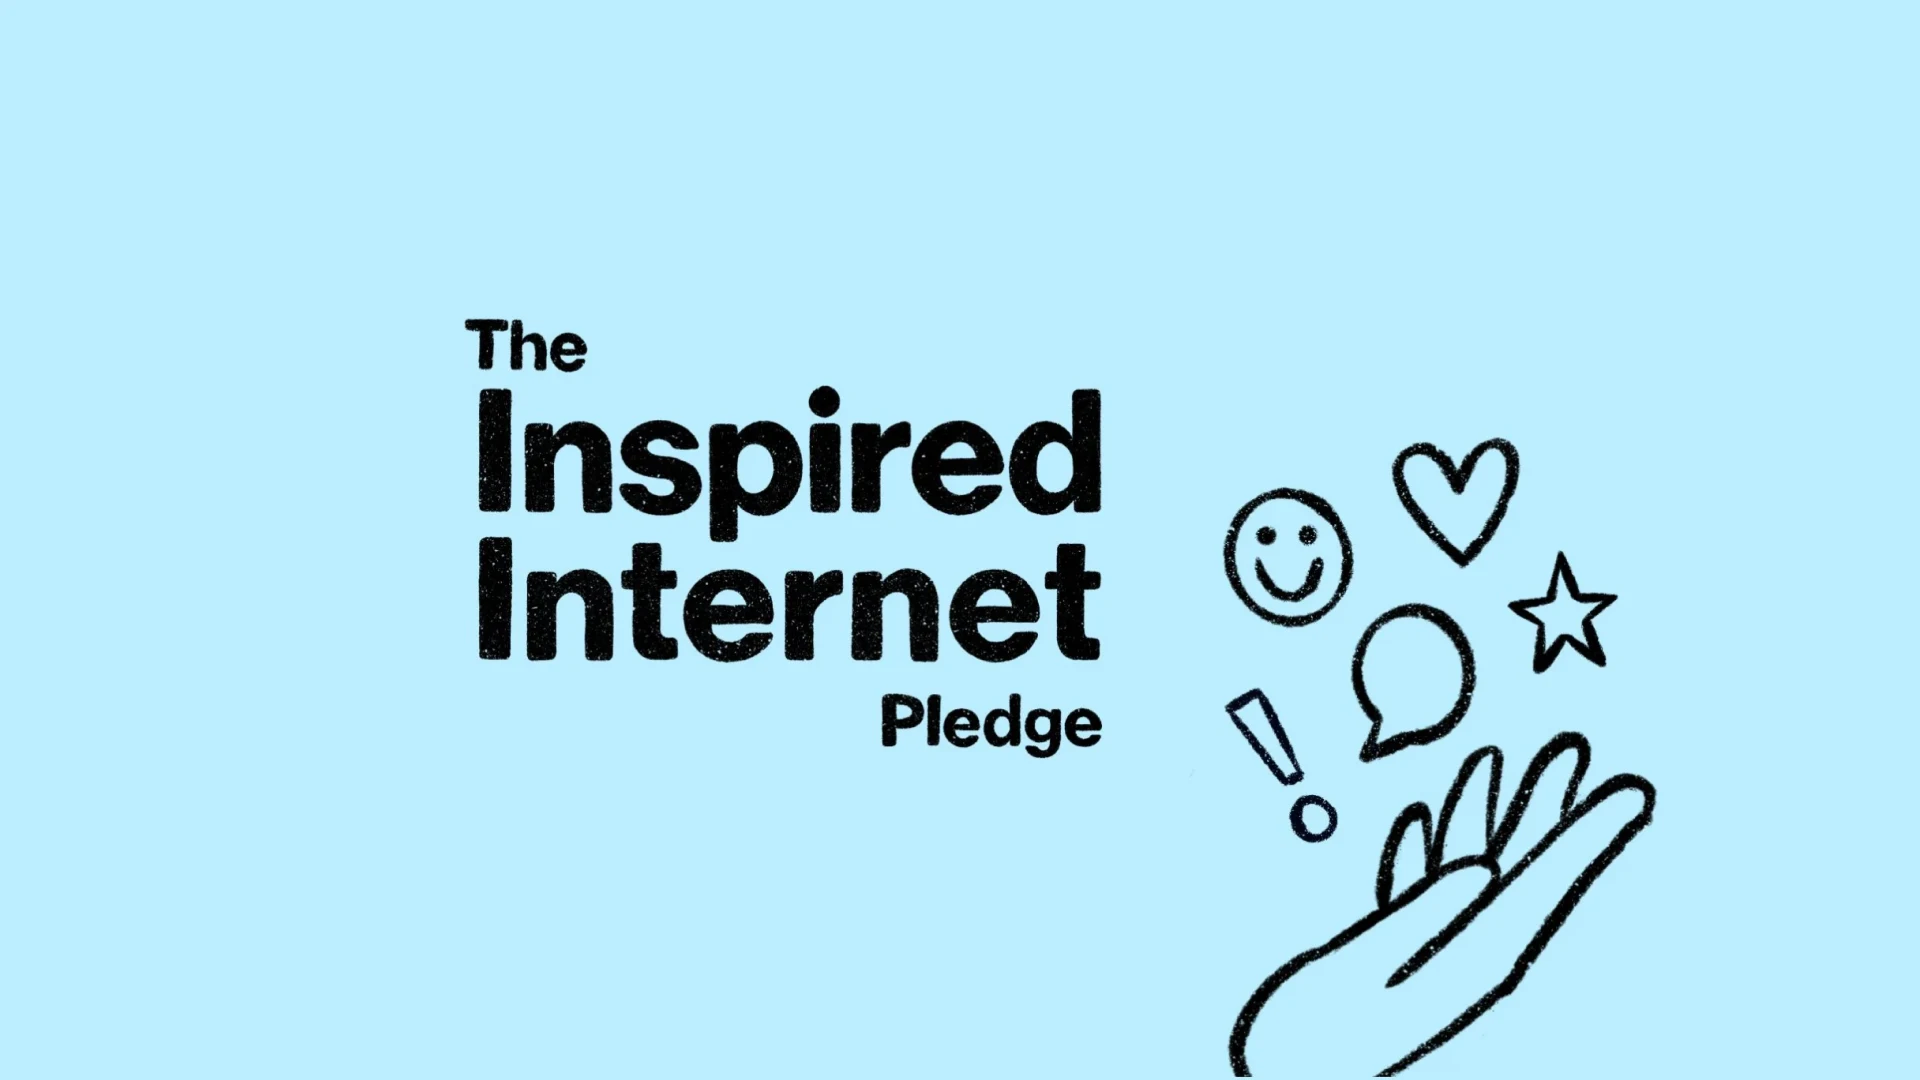 Over a blue background, the words "The Inspired Internet Pledge" are featured beside a drawing of a hand holding icons such as a heart, smiley face and star